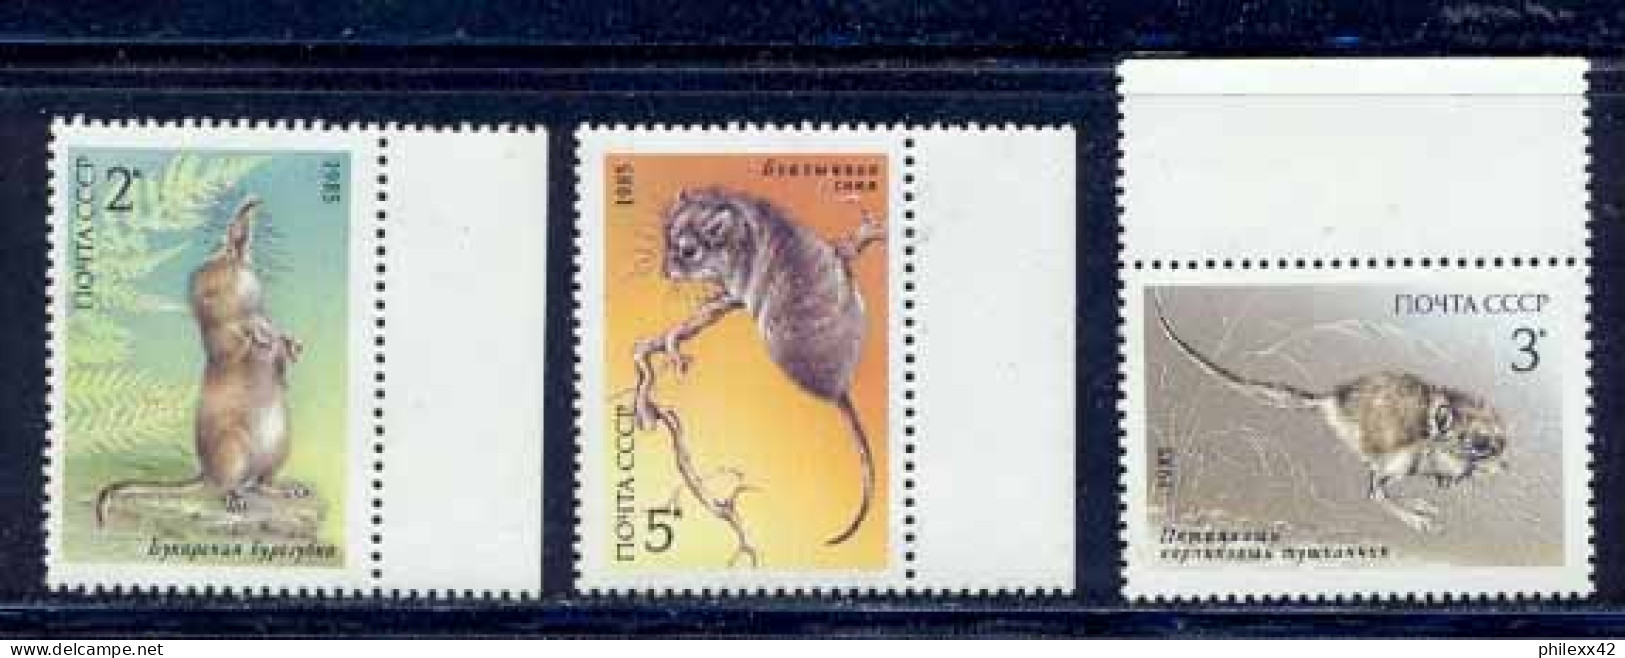 Russie (Russia Urss USSR) - 166 - N°5240 / 5242 Faune (Animals & Fauna) RONGEURS - Rodents